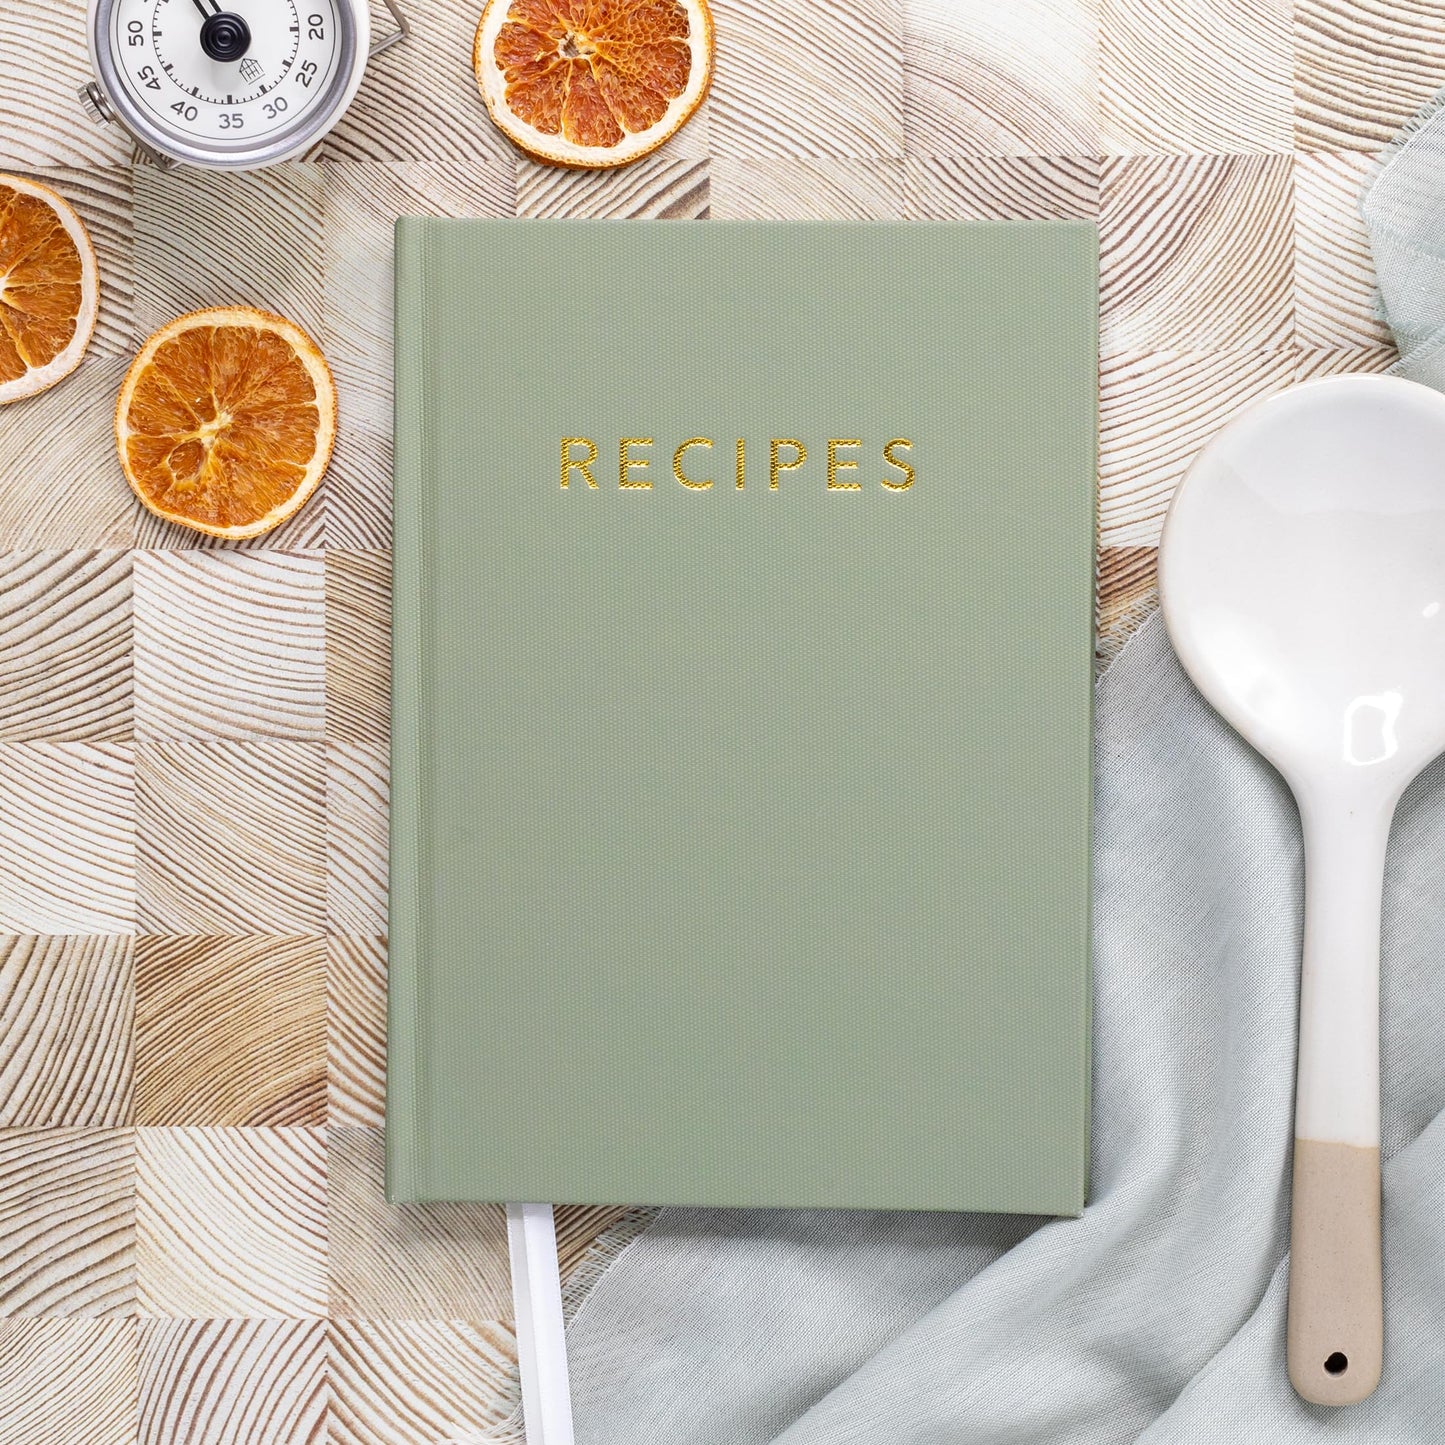 Aesthetic Blank Recipe Book with Waterproof Cover - The Perfect Recipe Notebook To Write In Your Own Recipes - Simplified Blank Cookbook to Organize Your Recipes